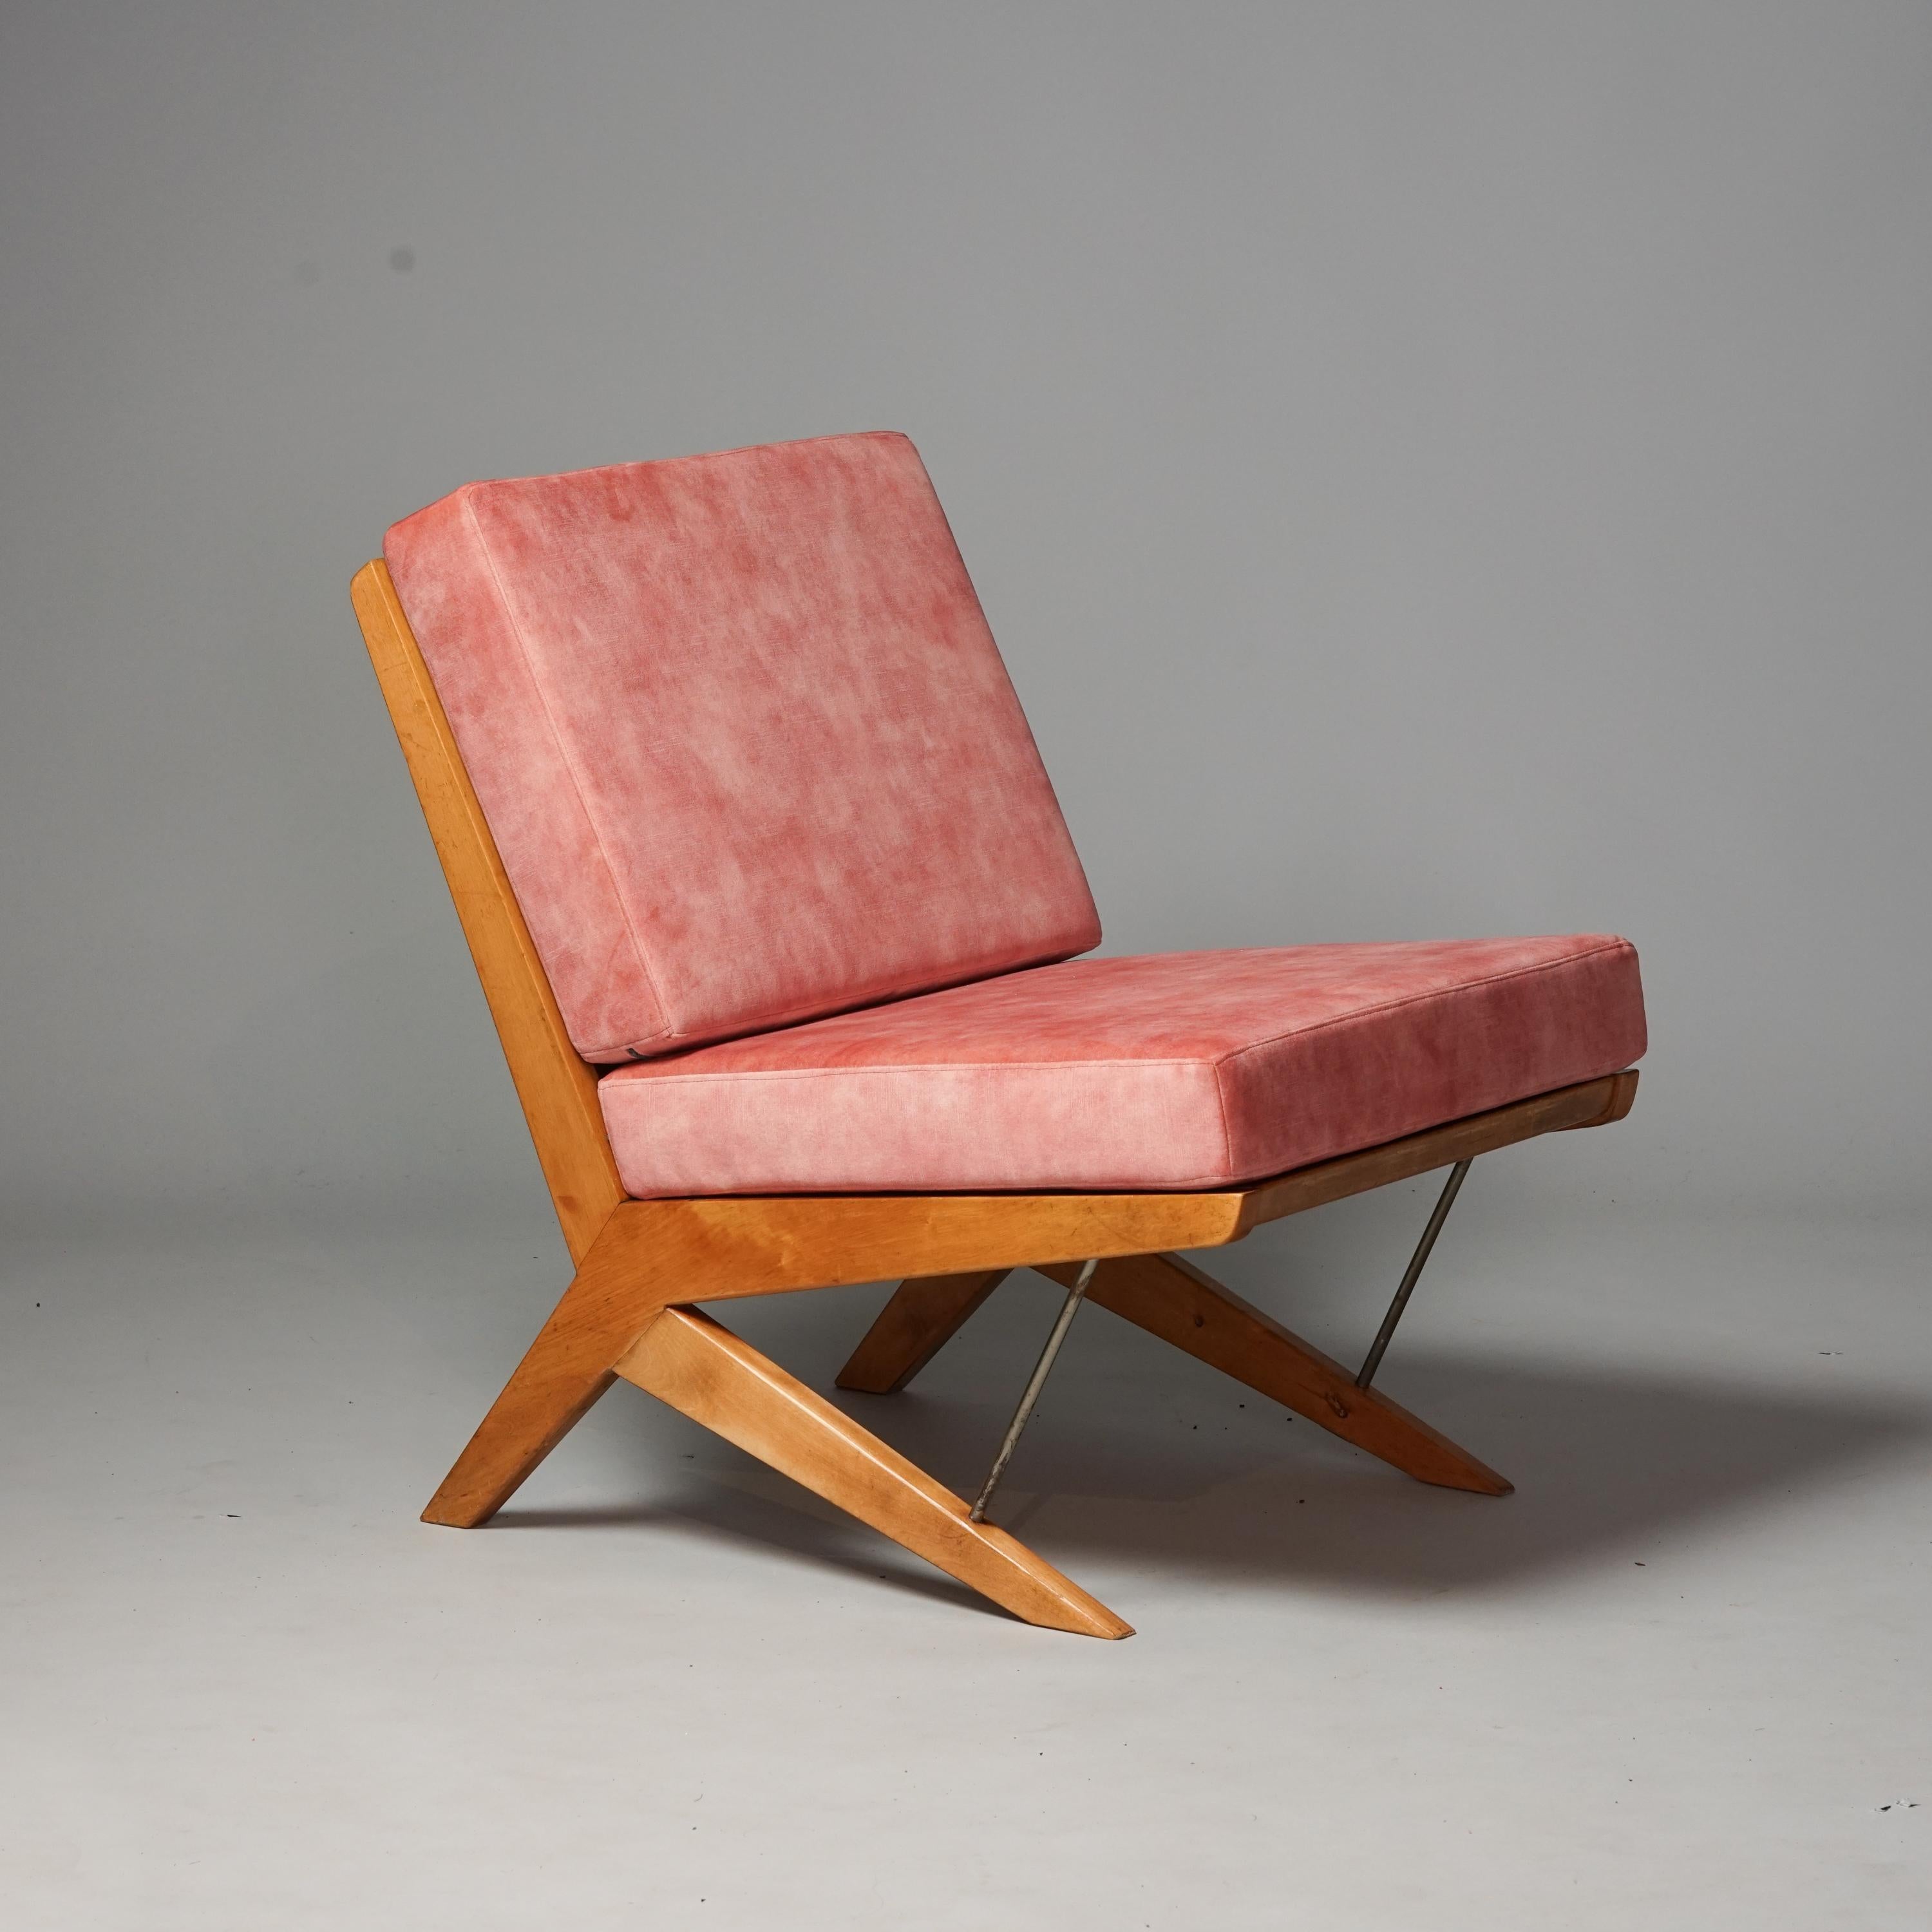 Birch armchair in the style of Olavi Hänninen, 1950/1960s. Birch frame with brass details. Reupholstered with quality fabric. Good vintage condition, minor patina on the frame consistent with age and use. 

Olavi Tapio Hänninen was a Finnish